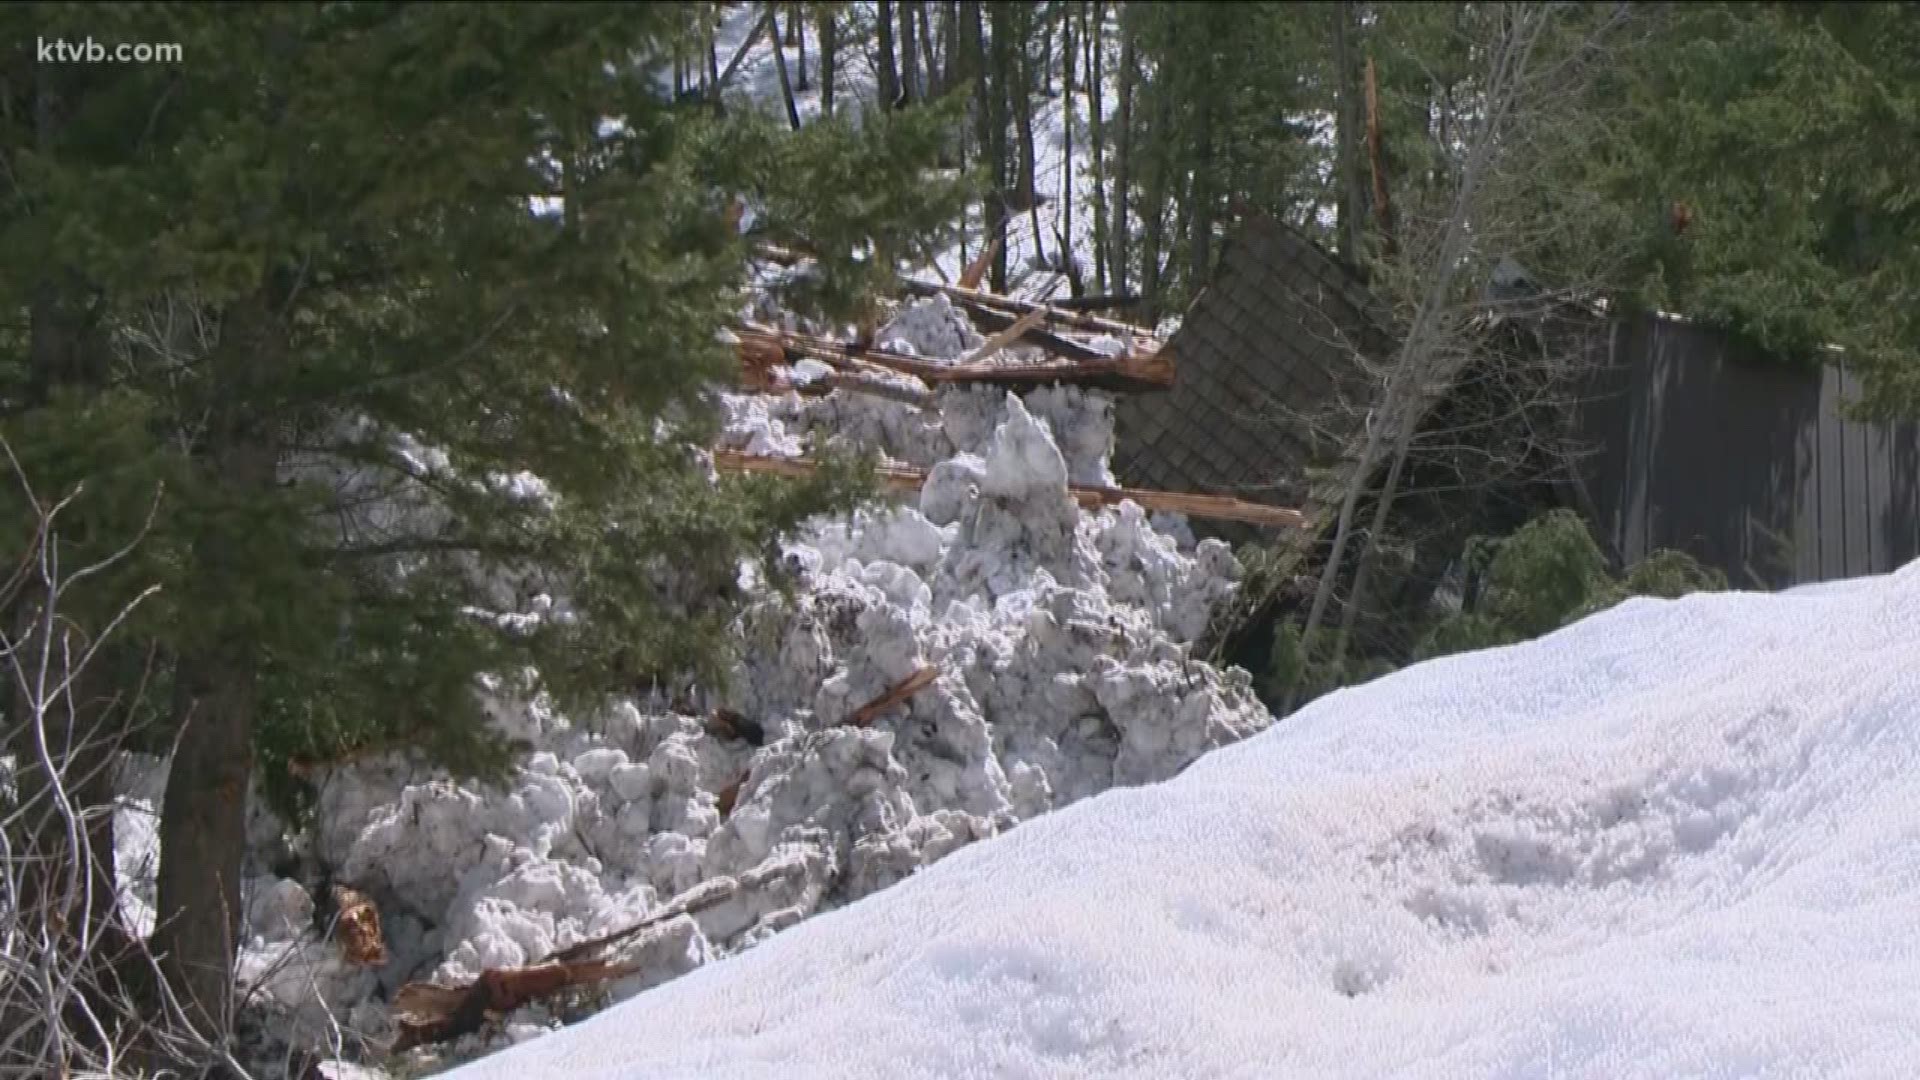 The avalanche danger is still very high in central Idaho.